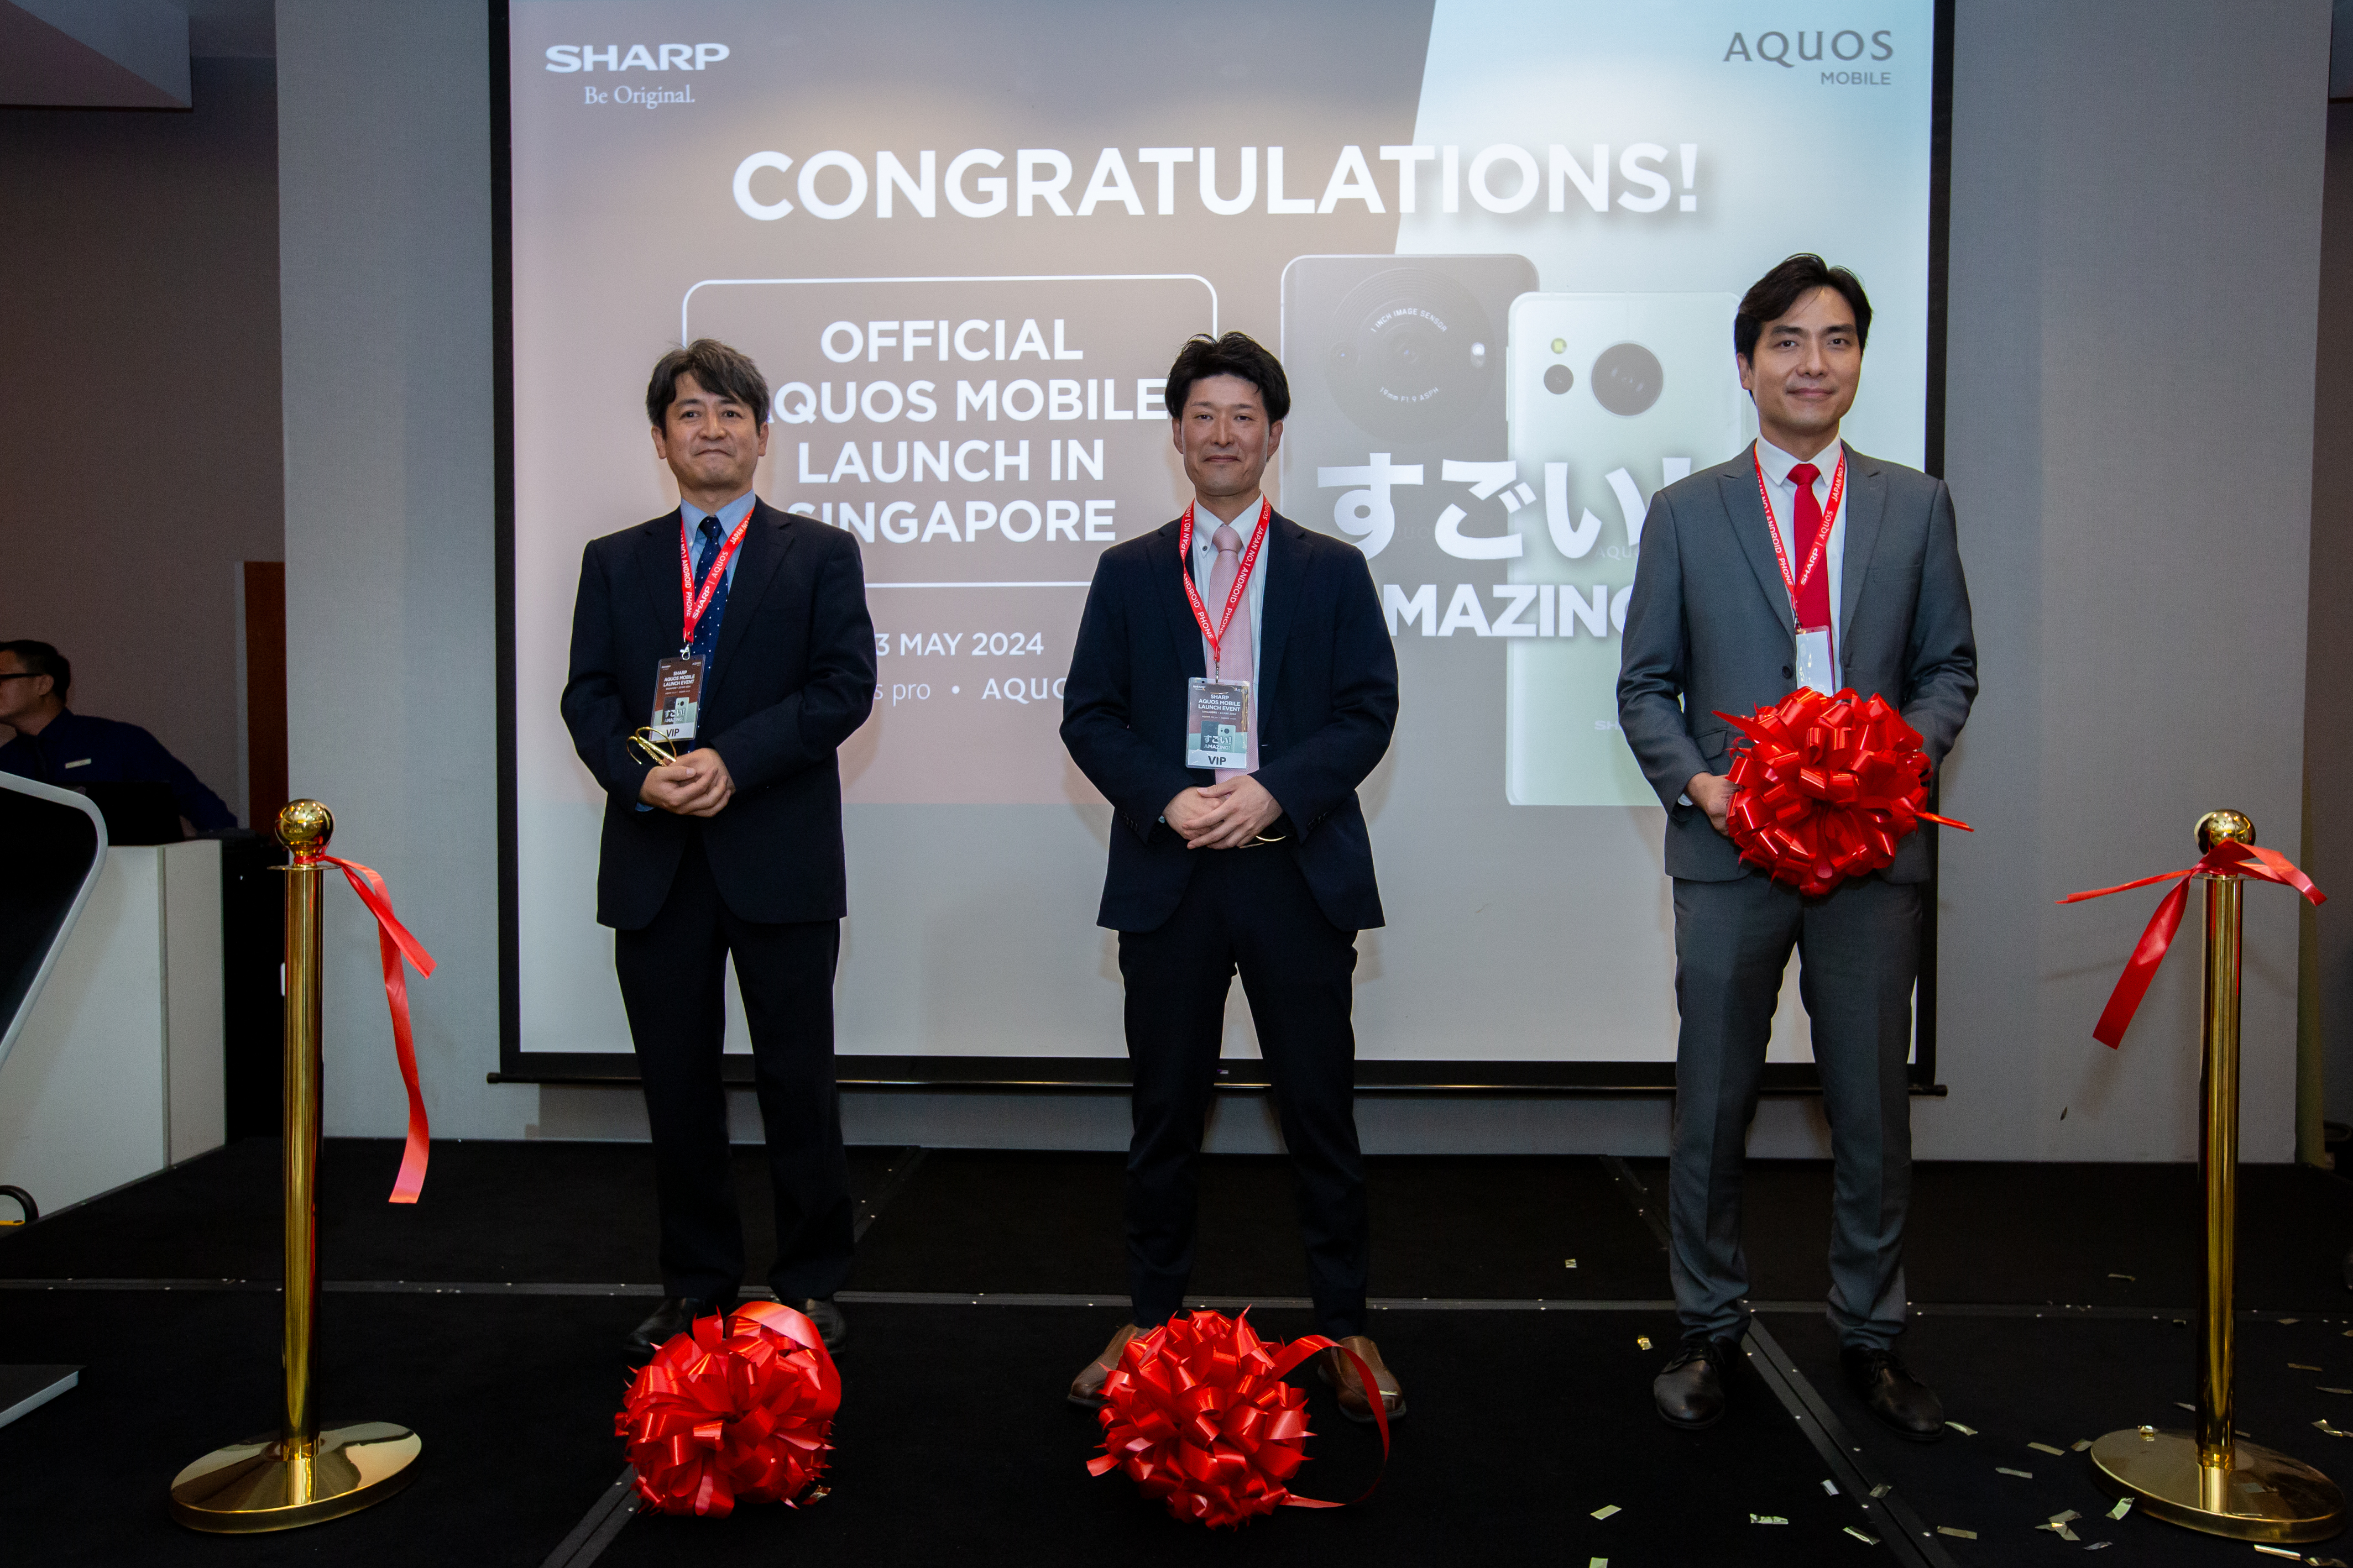 From Left to Right: Shinya Akashi, Deputy Division Manager of MCB Sharp Corporation, Masaaki Nakae, General Manager of MCB Sharp Corporation & Mr Woo Keat Chew, Managing Director of Sharp Singapore